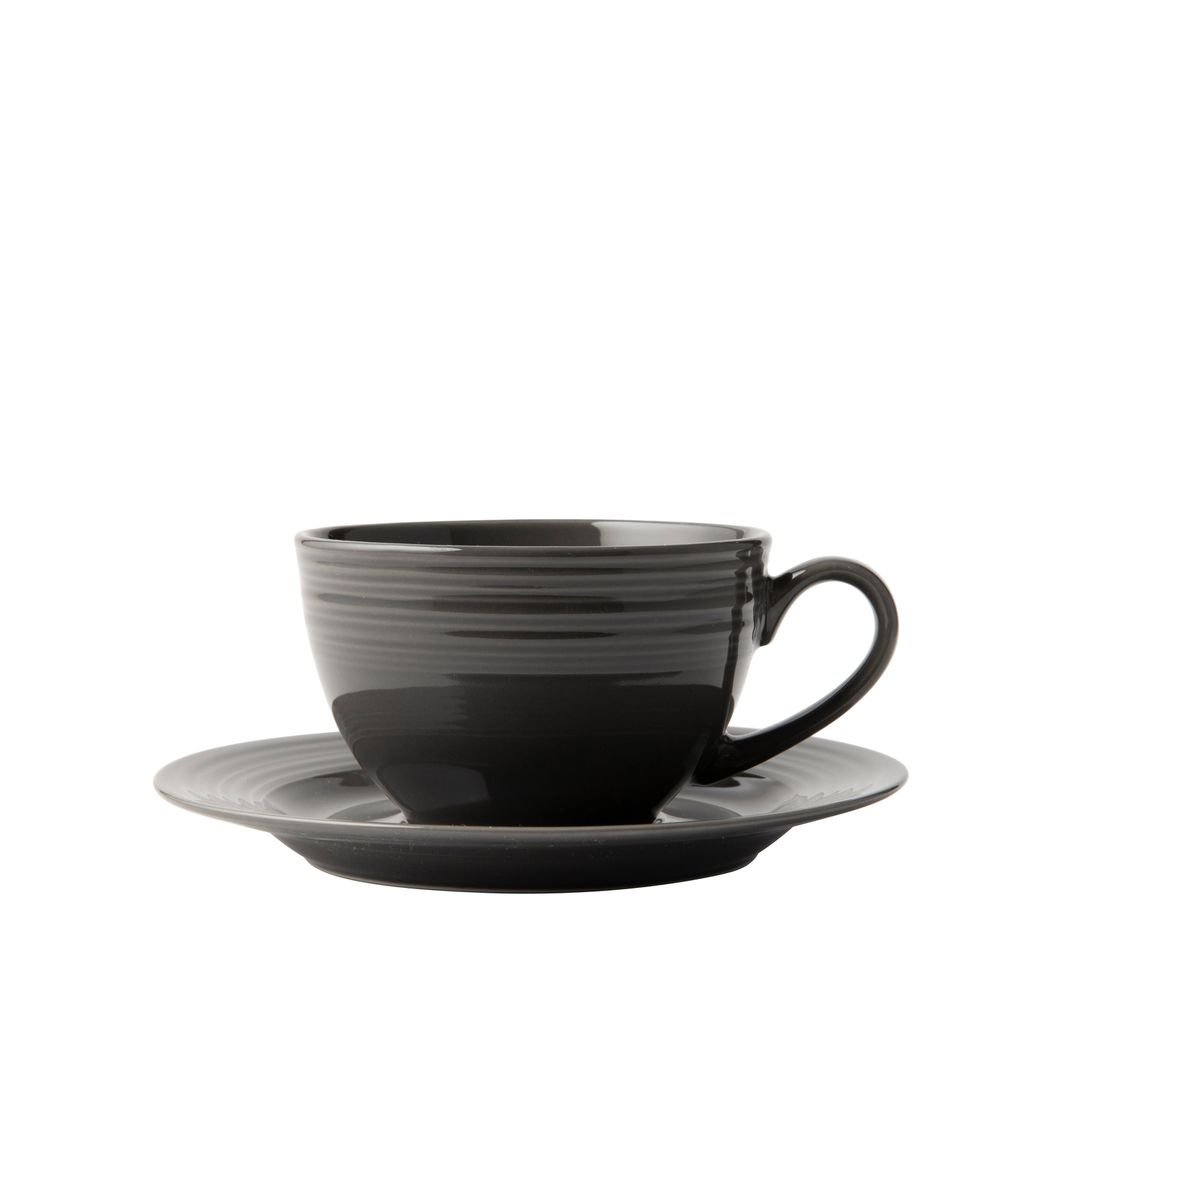 Jenna Clifford Embossed Lines Dark Grey Cup And Saucer Set of 4